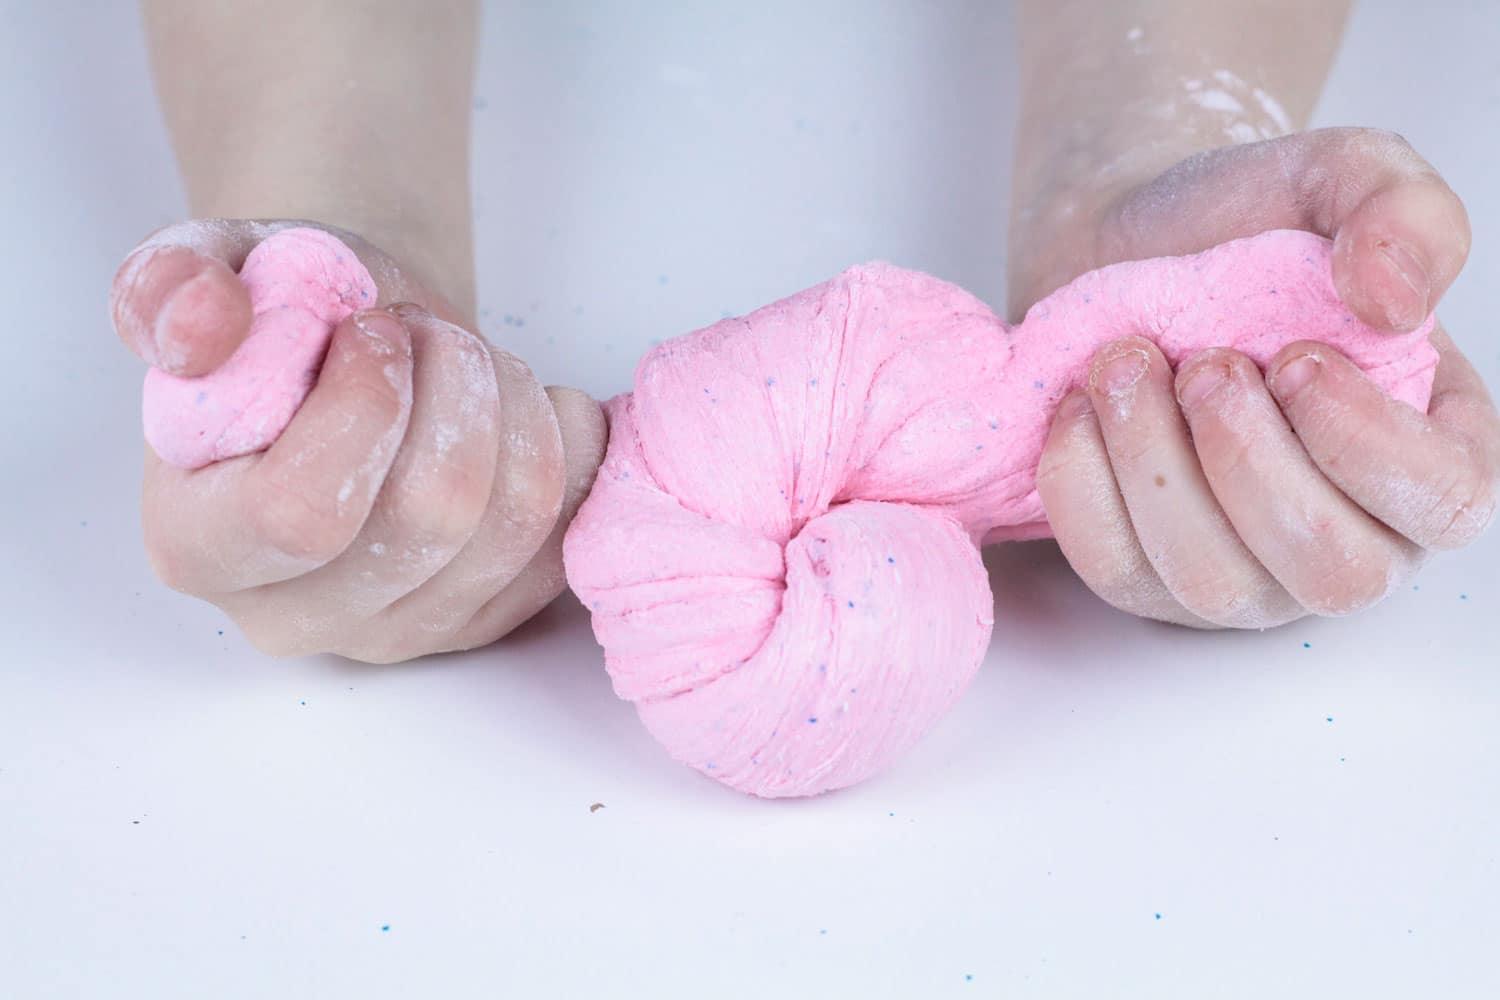 Love Peeps? Love slime? Make this edible Peeps slime recipe for Easter! This recipe for Peeps slime is the perfect Easter slime recipe and makes the perfect edible slime recipe that is a borax free slime and safe for all ages!